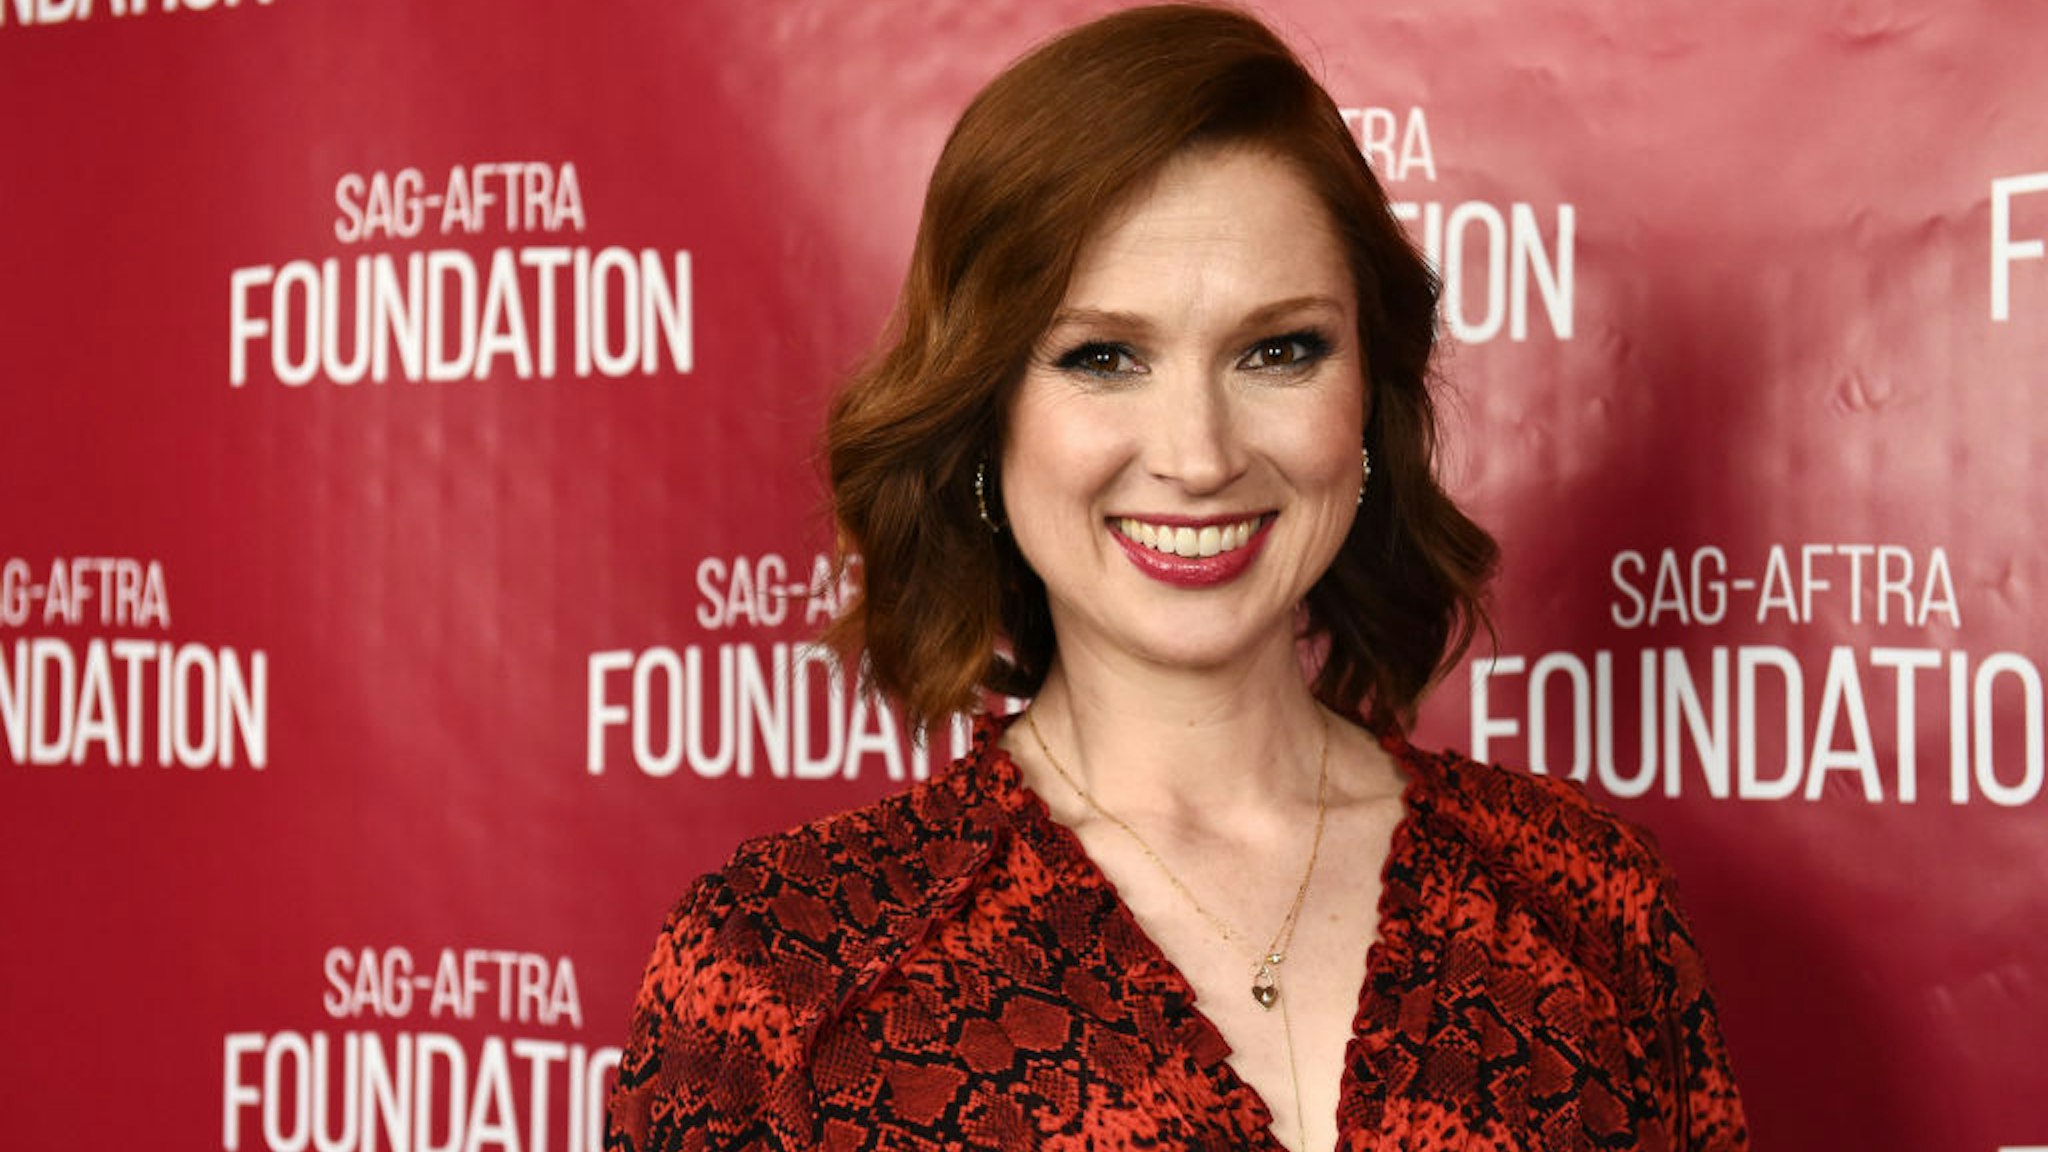 LOS ANGELES, CALIFORNIA - MAY 29: Actress Ellie Kemper attends the SAG-AFTRA Foundation Conversations with "Unbreakable Kimmy Schmidt" at the SAG-AFTRA Foundation Screening Room on May 29, 2019 in Los Angeles, California. (Photo by Amanda Edwards/Getty Images)